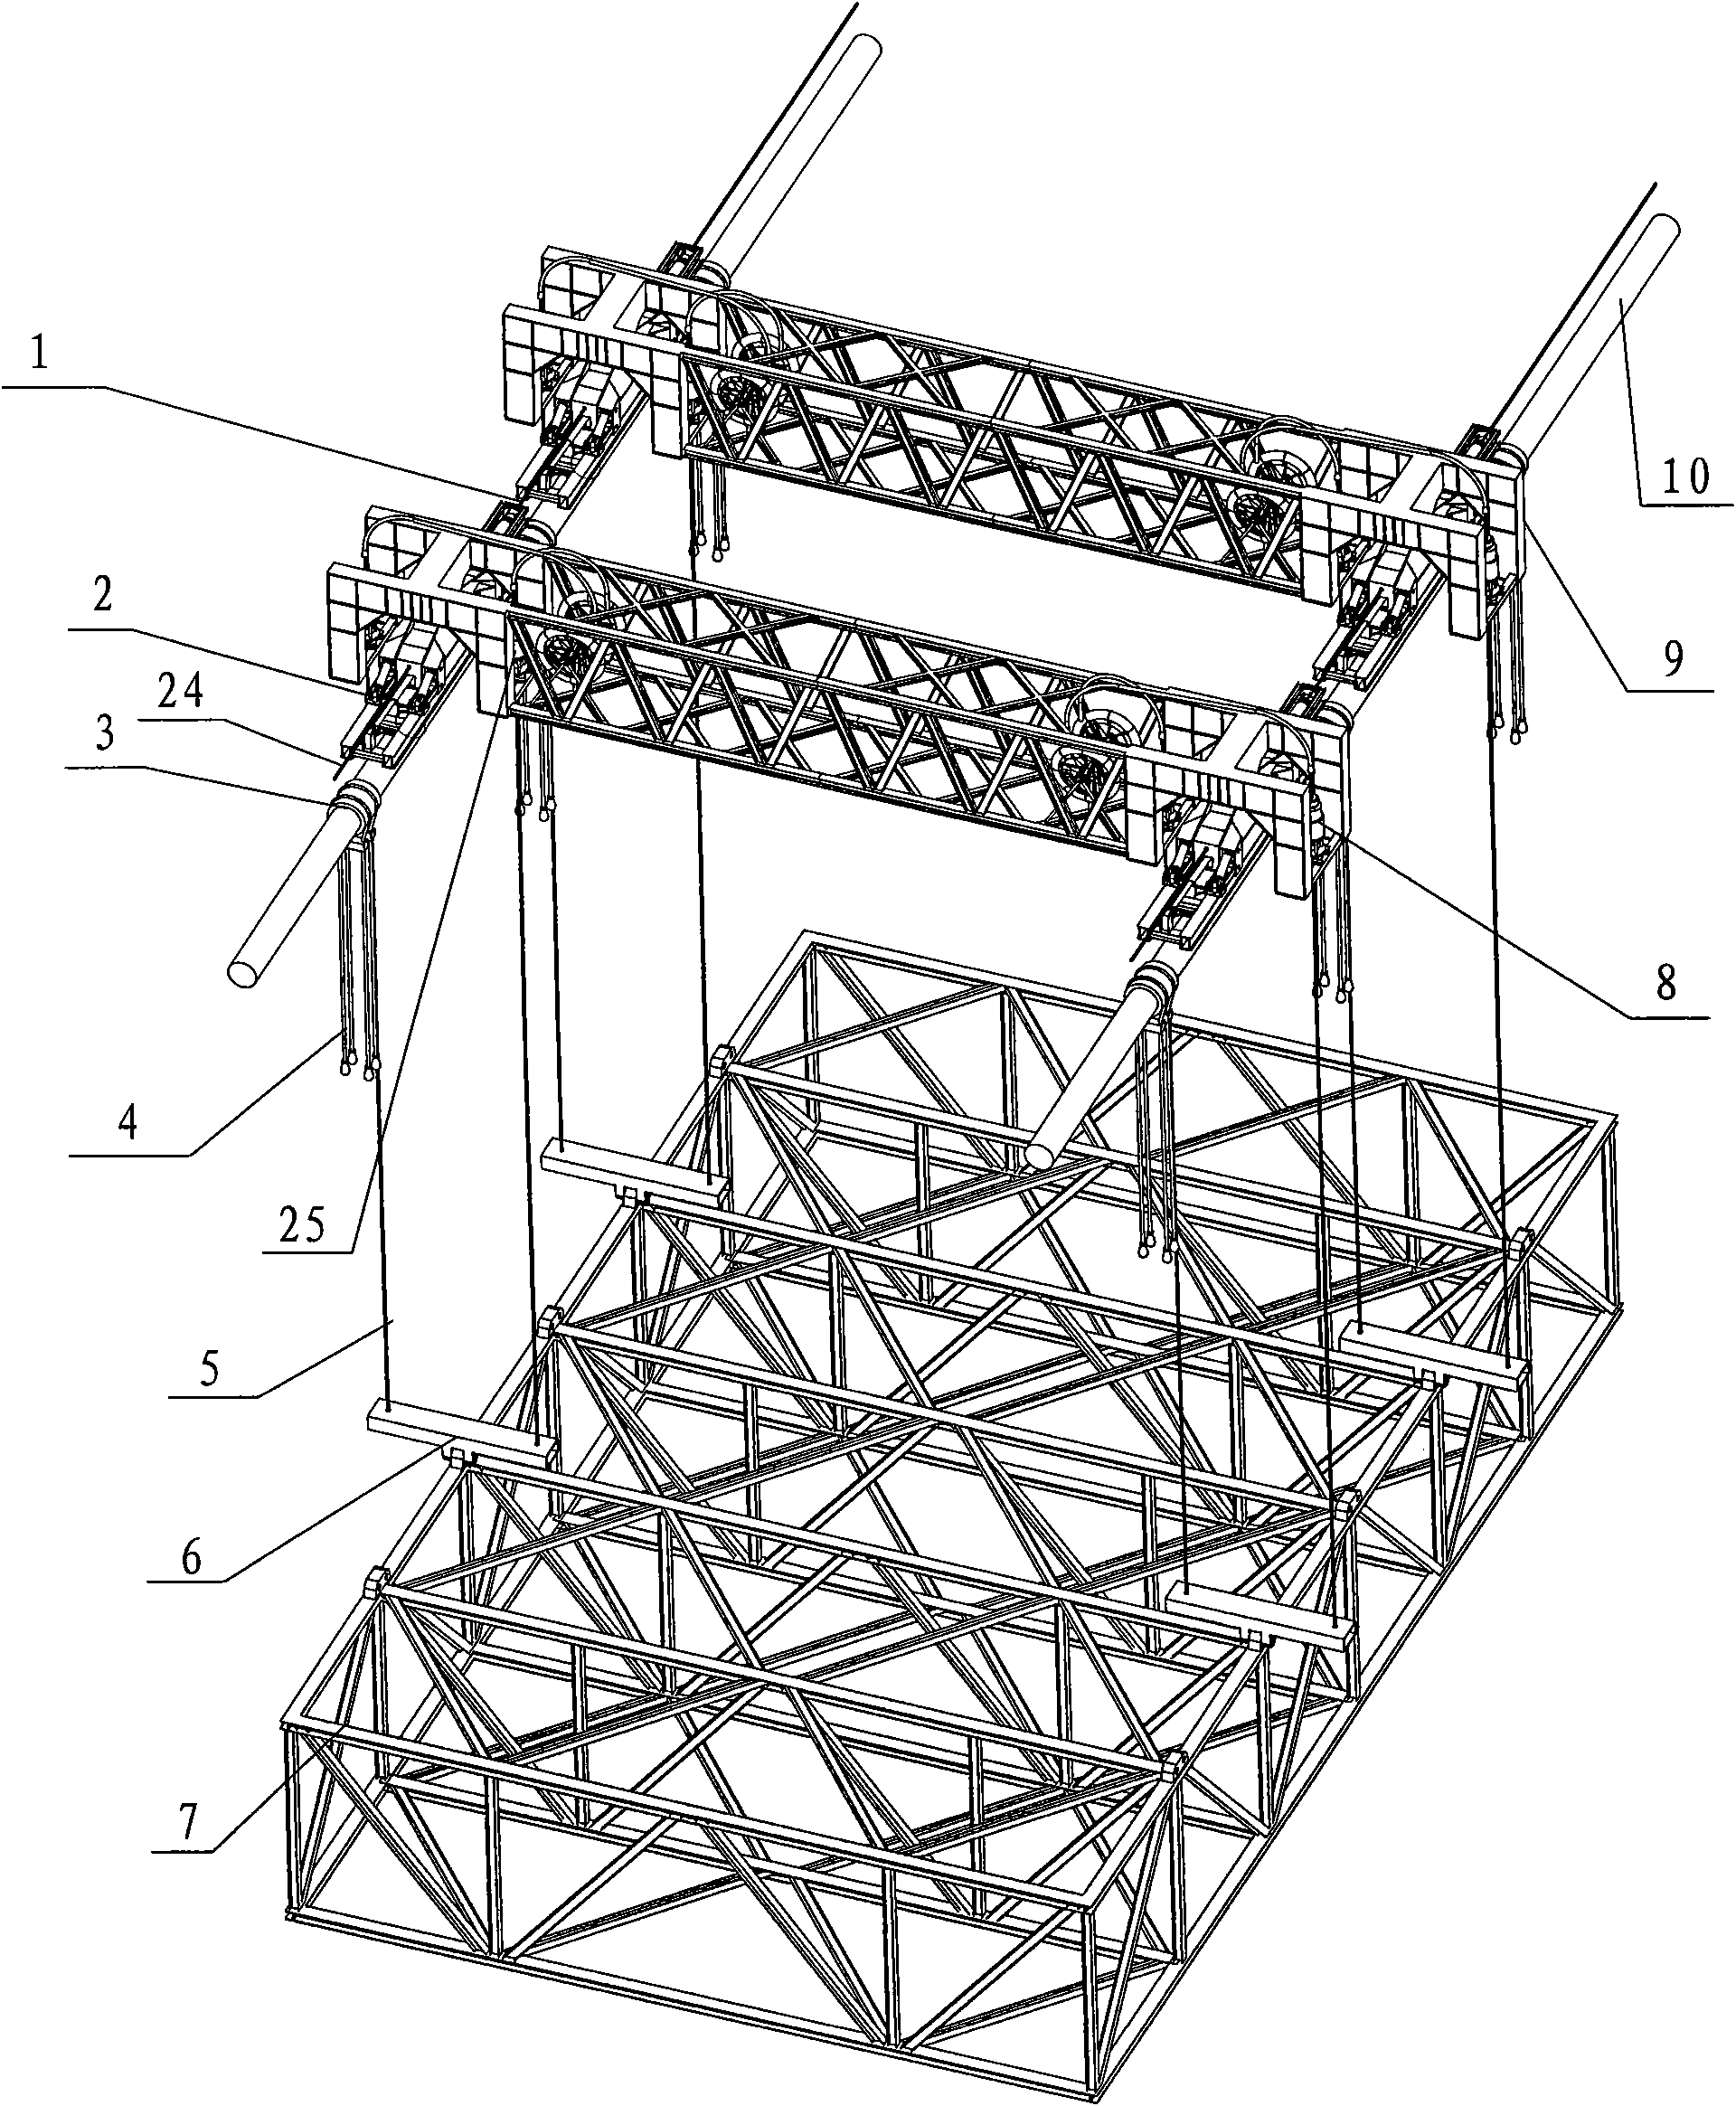 Method for erecting girder of suspension bridge by double-hoisting hydraulic NC (numerical control) cable crane